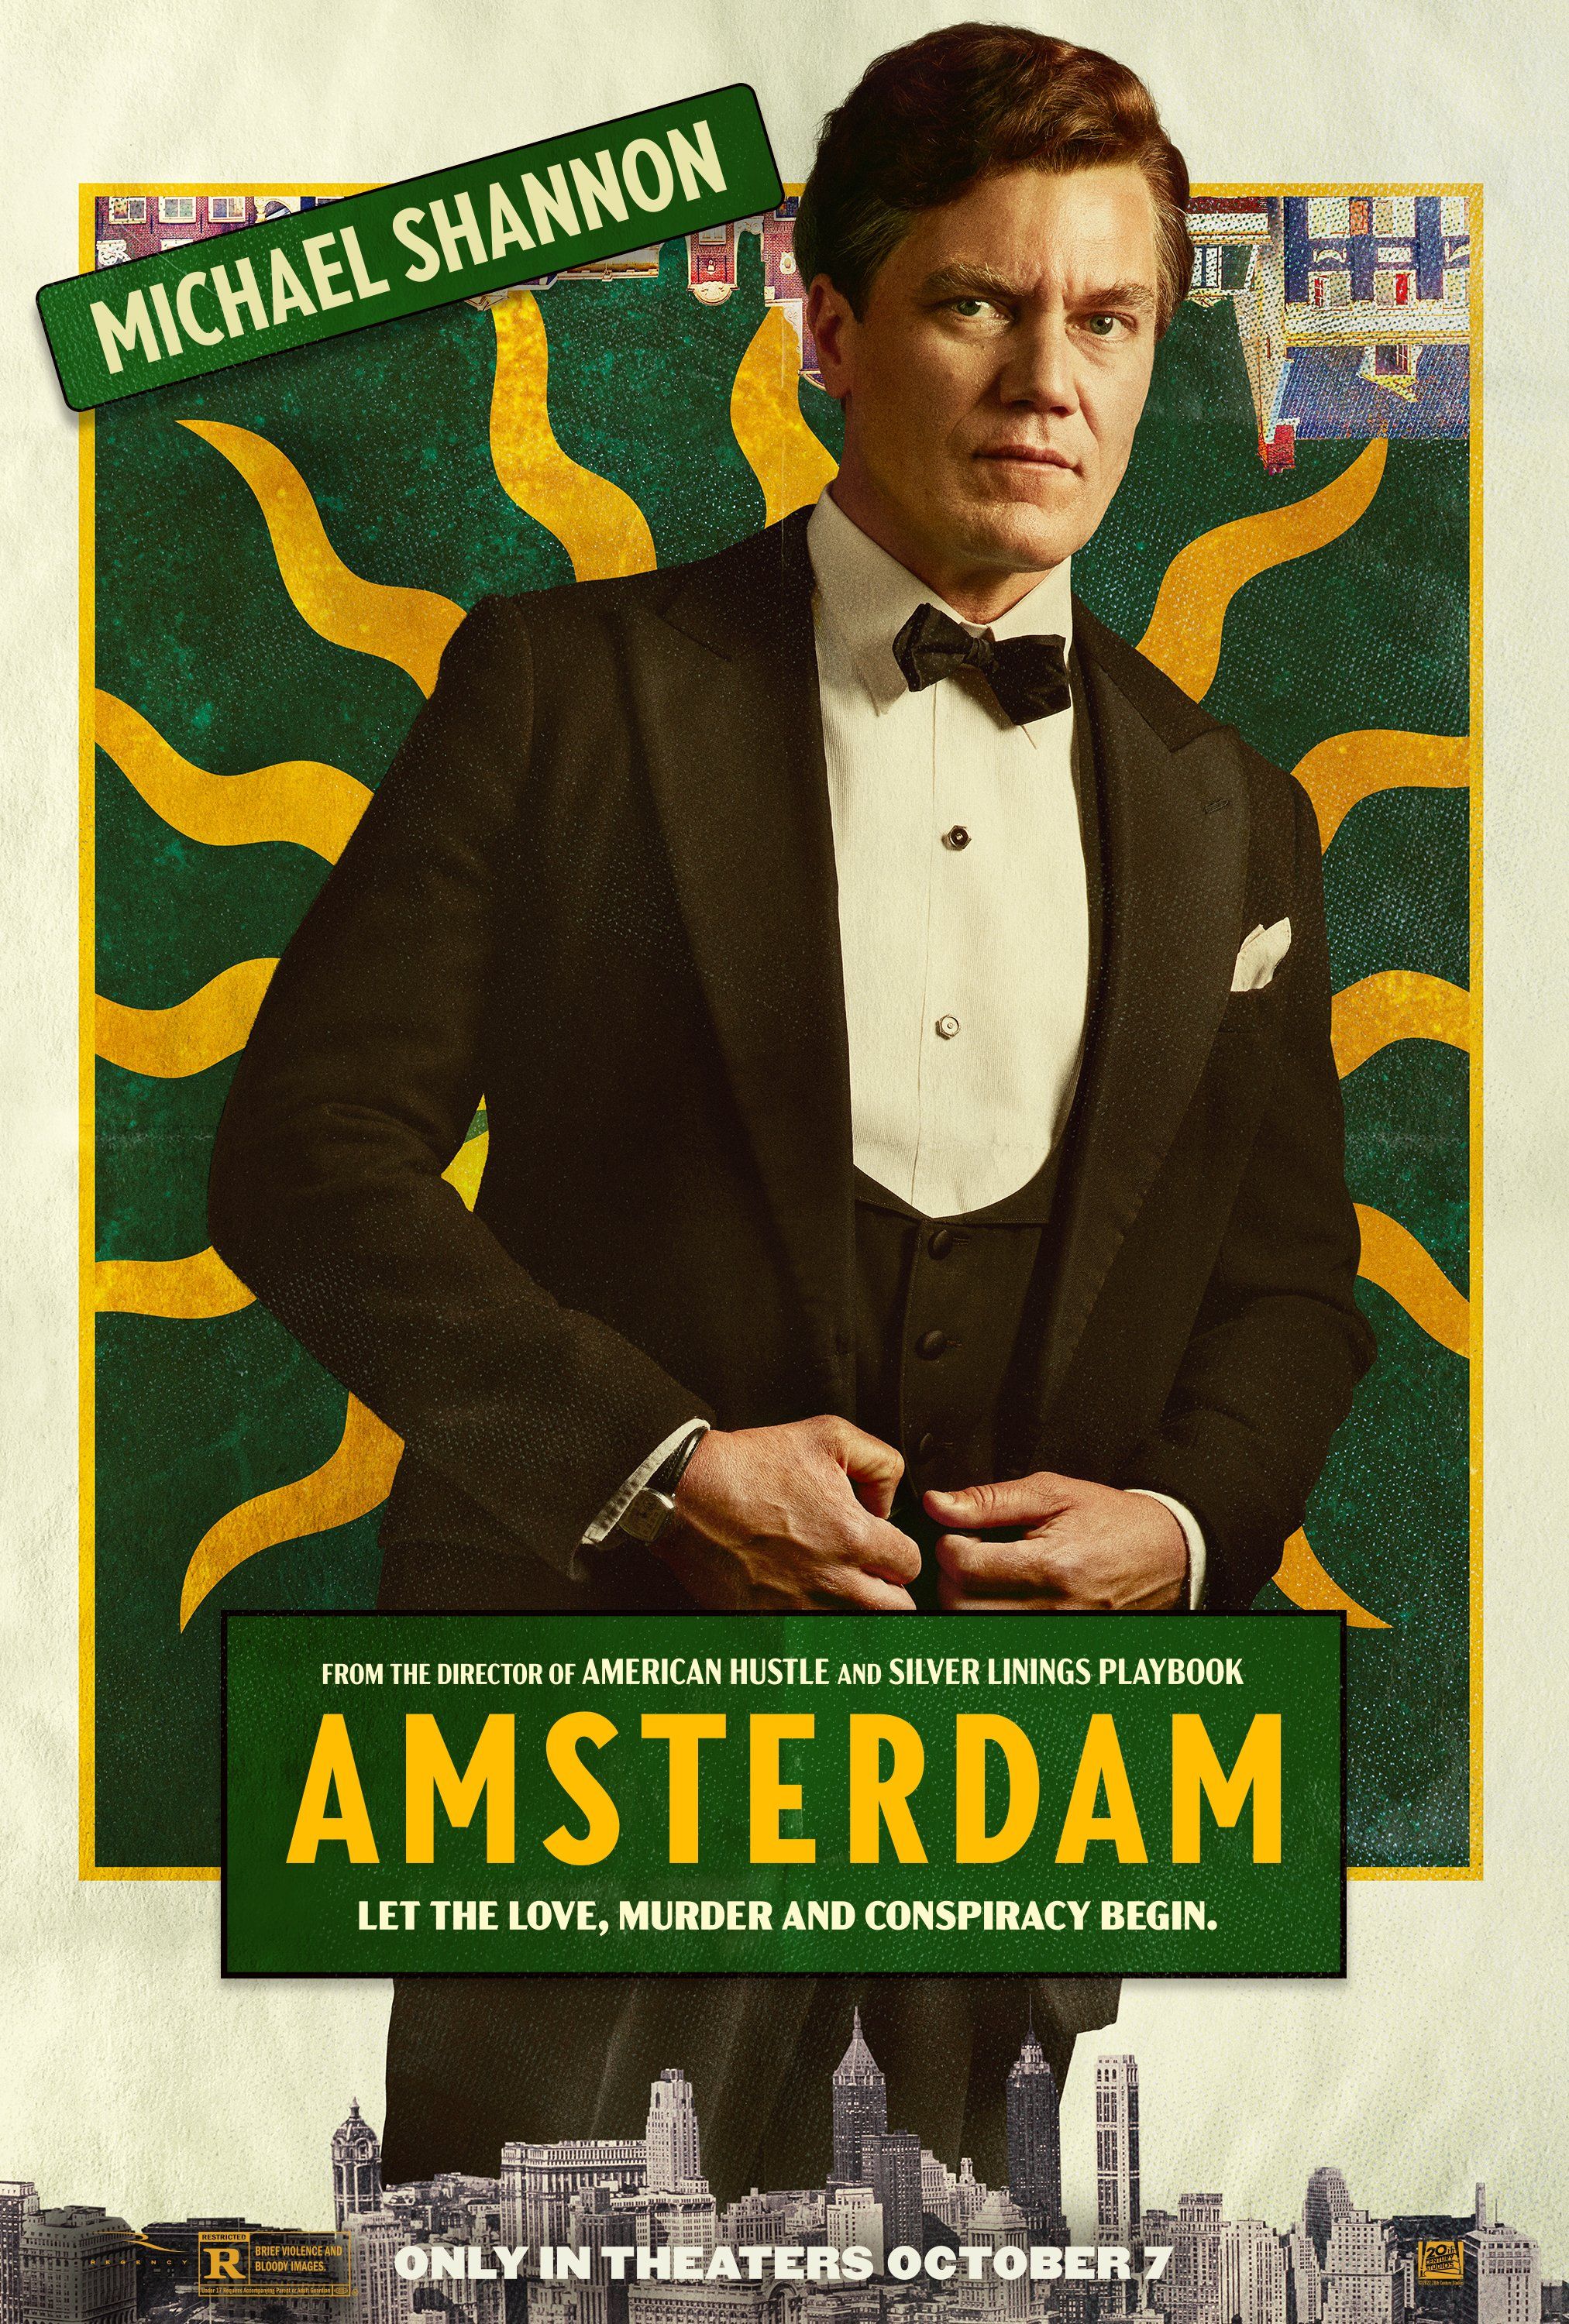 Michael Shannon in Amsterdam poster